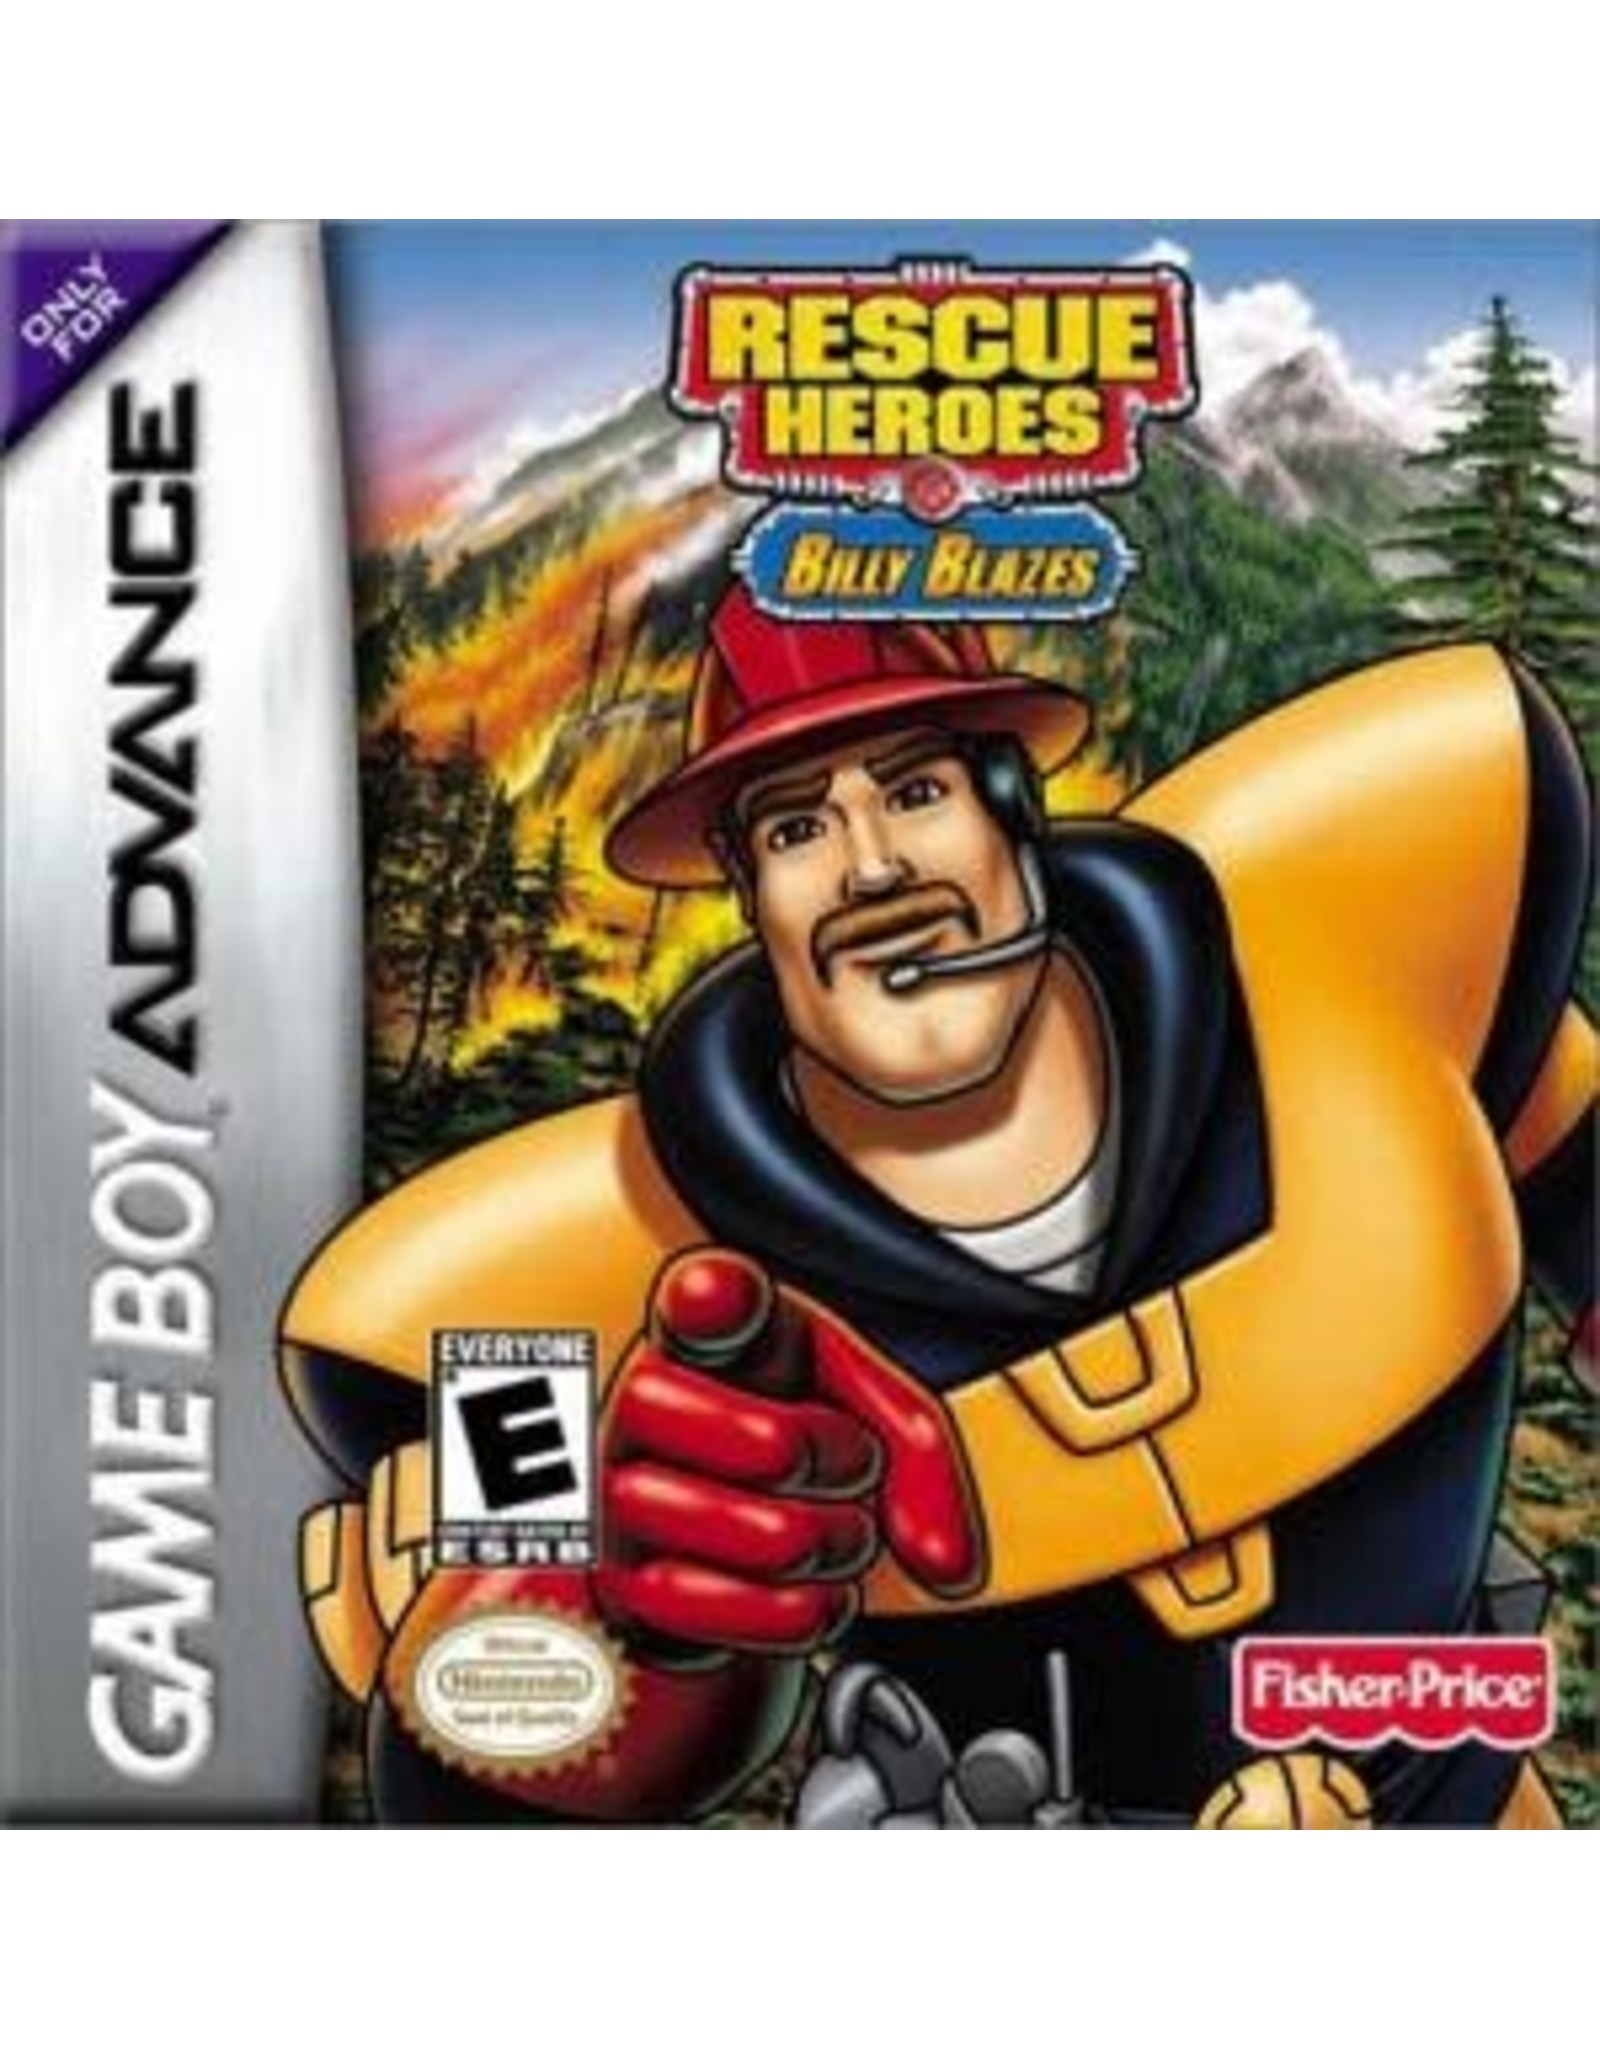 Game Boy Advance Rescue Heroes Billy Blazes (Used, Cart Only)